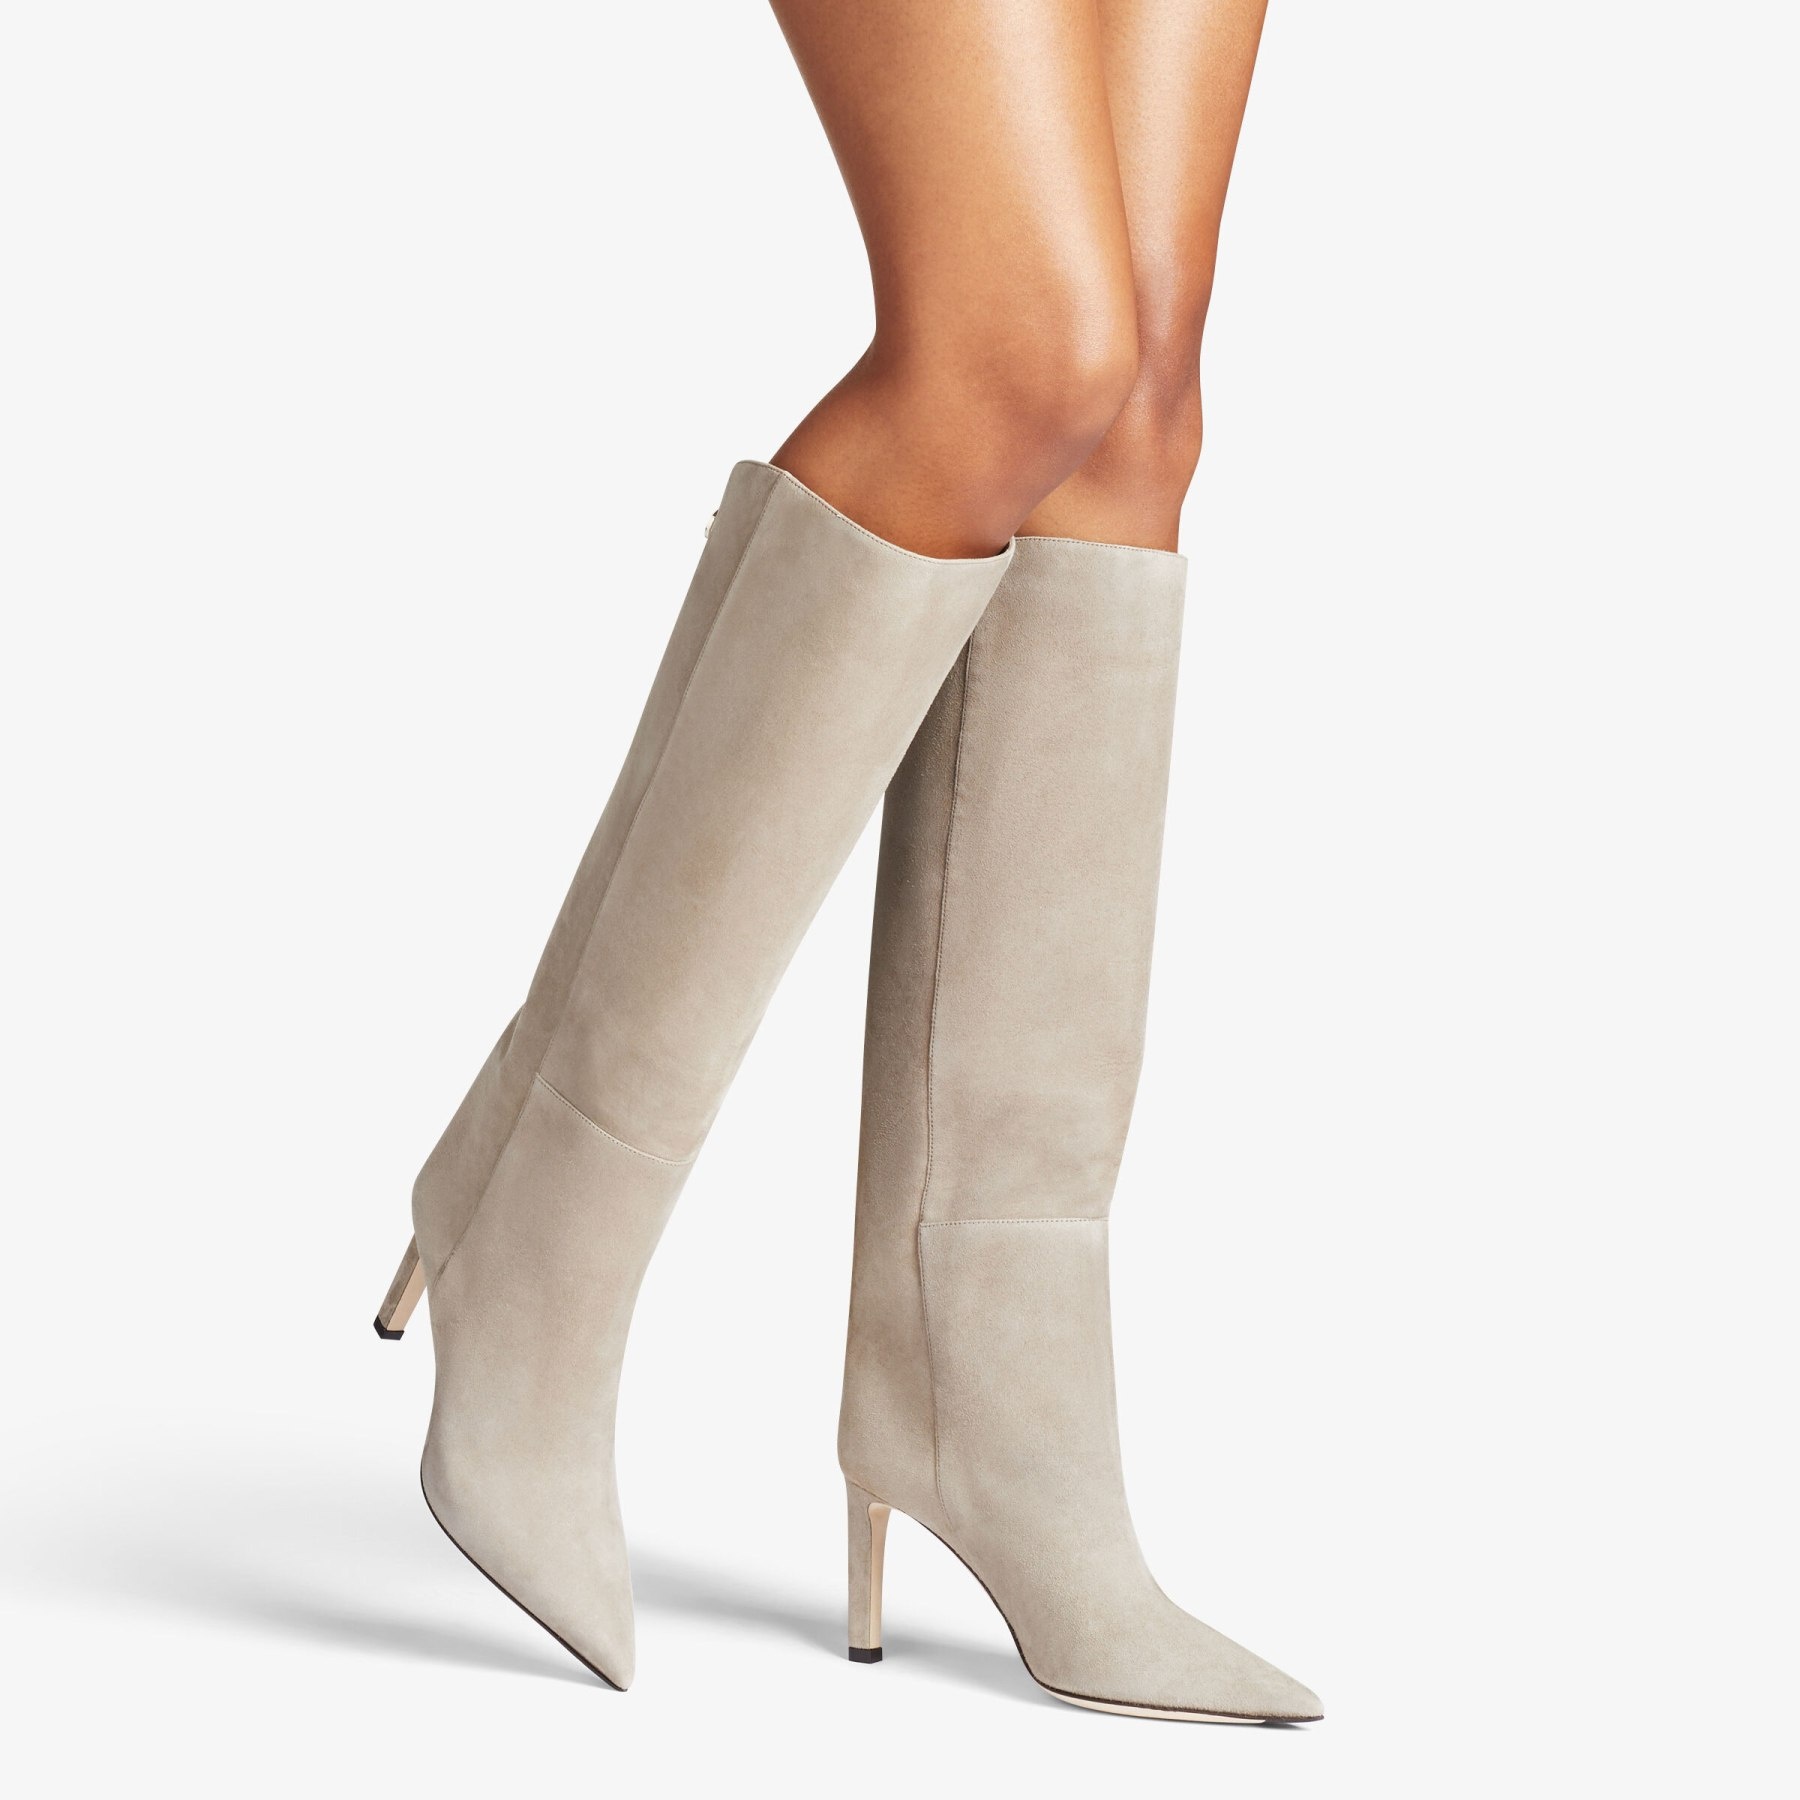 Alizze Knee Boot 85
Taupe Suede Knee-High Boots - 2